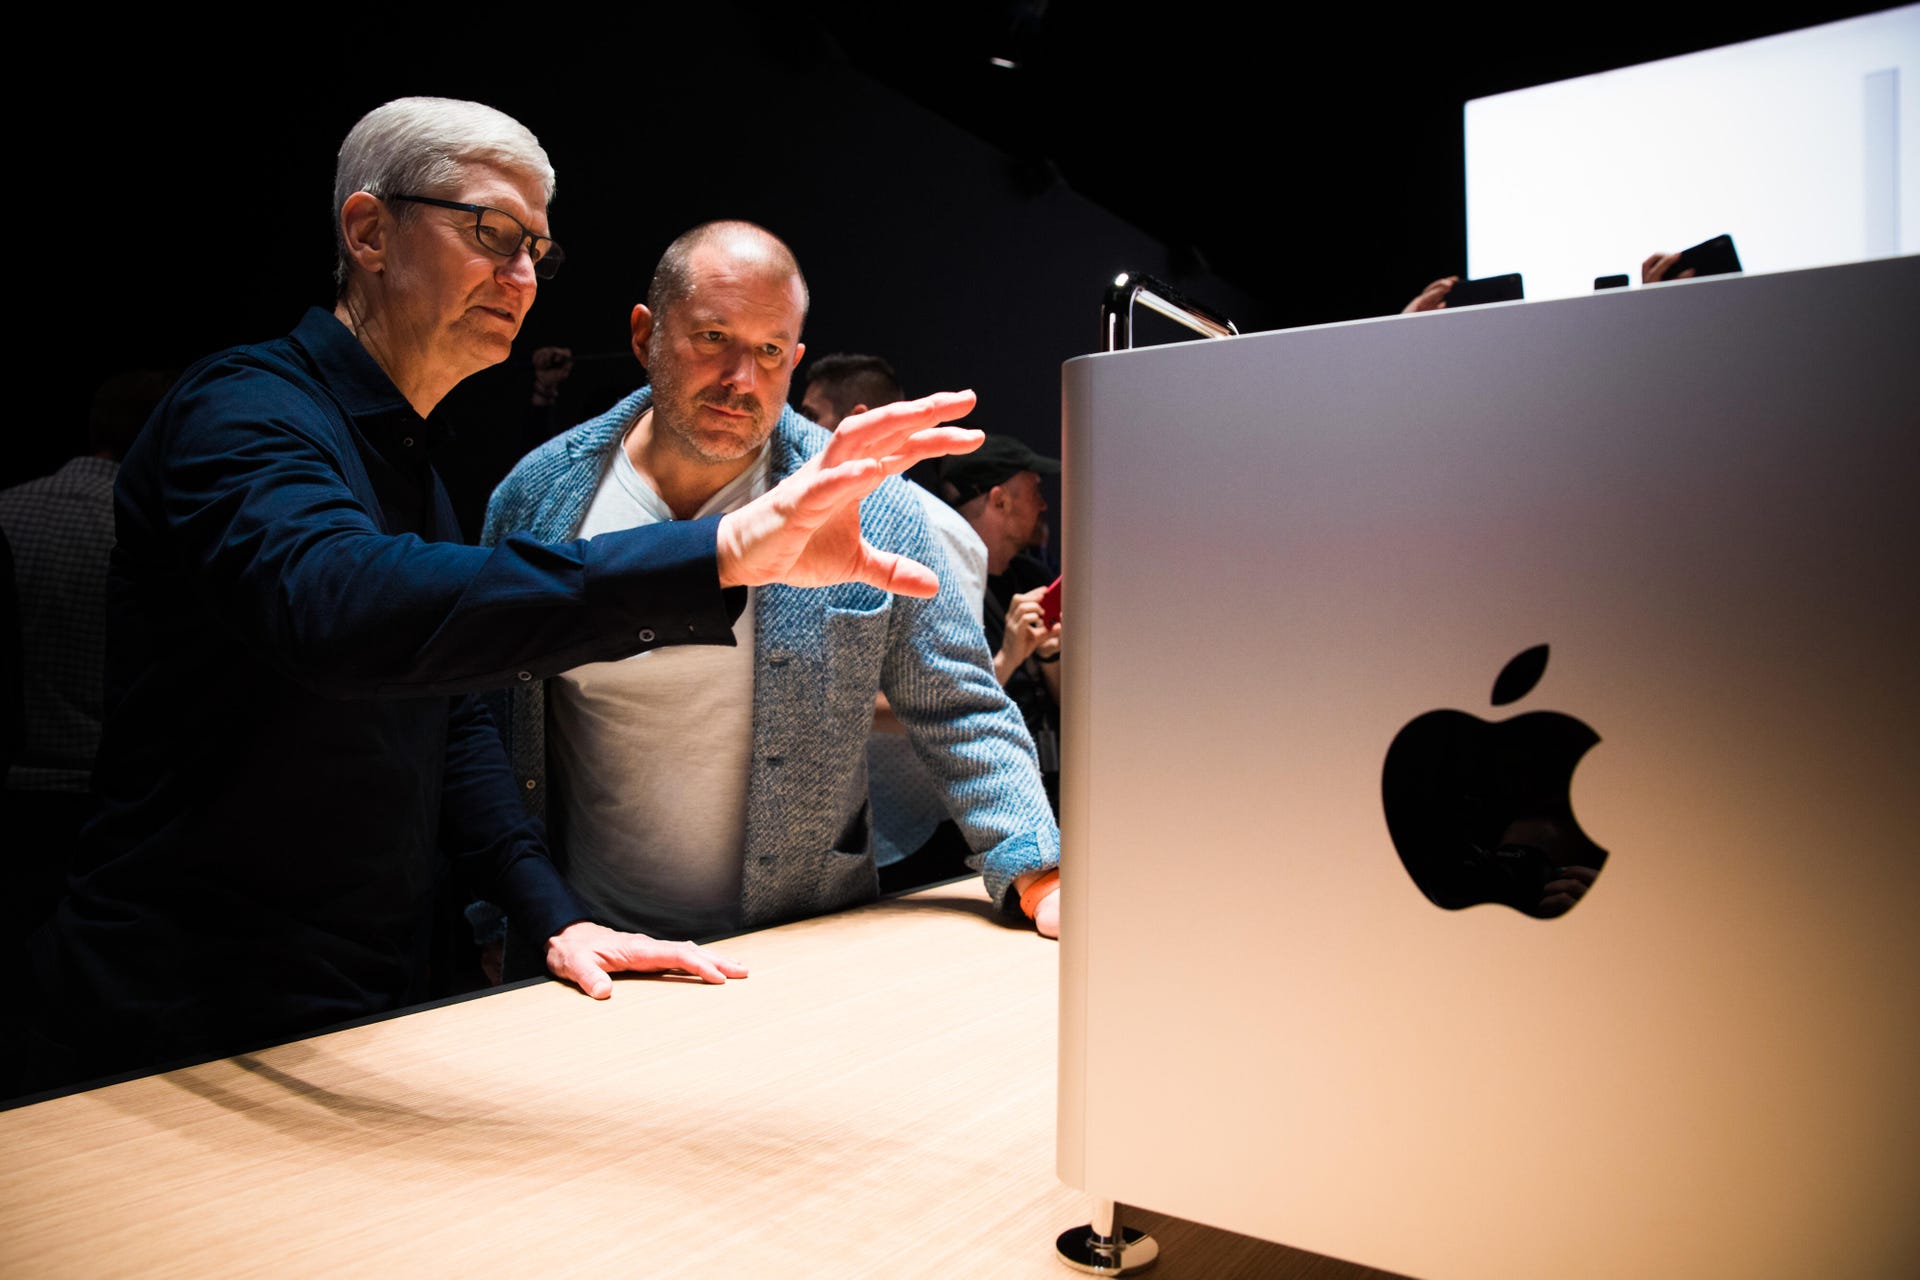 Tim Cook and Jony Ive at Apple WWDC with the new Mac Pro